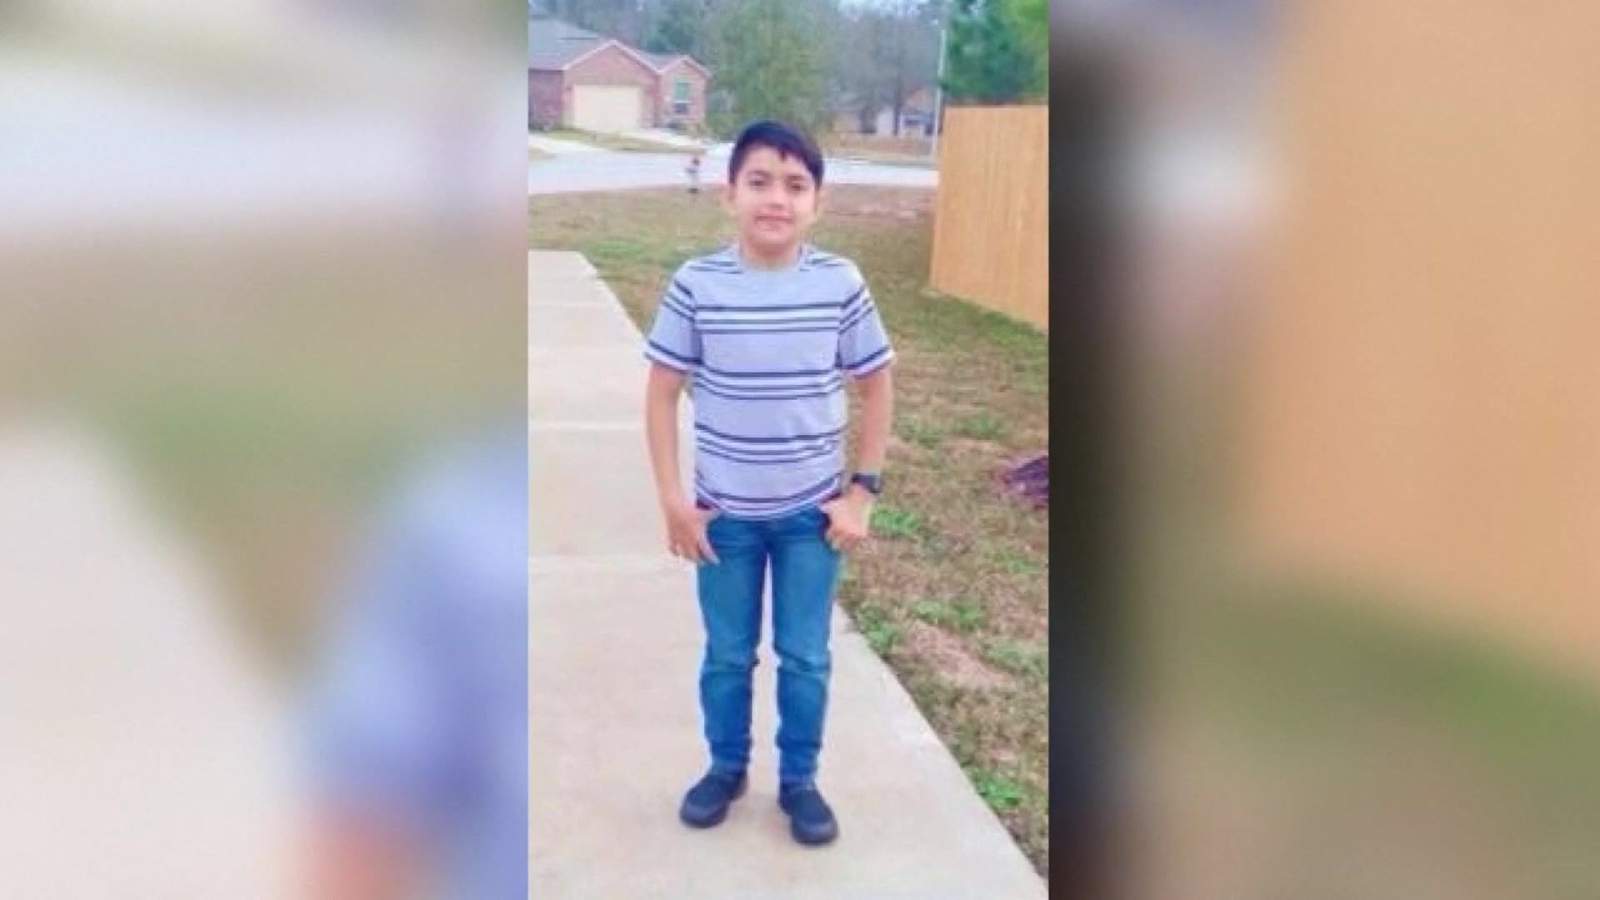 Lawsuit accuses ERCOT, Entergy of gross negligence after Conroe boy dies during frigid weather